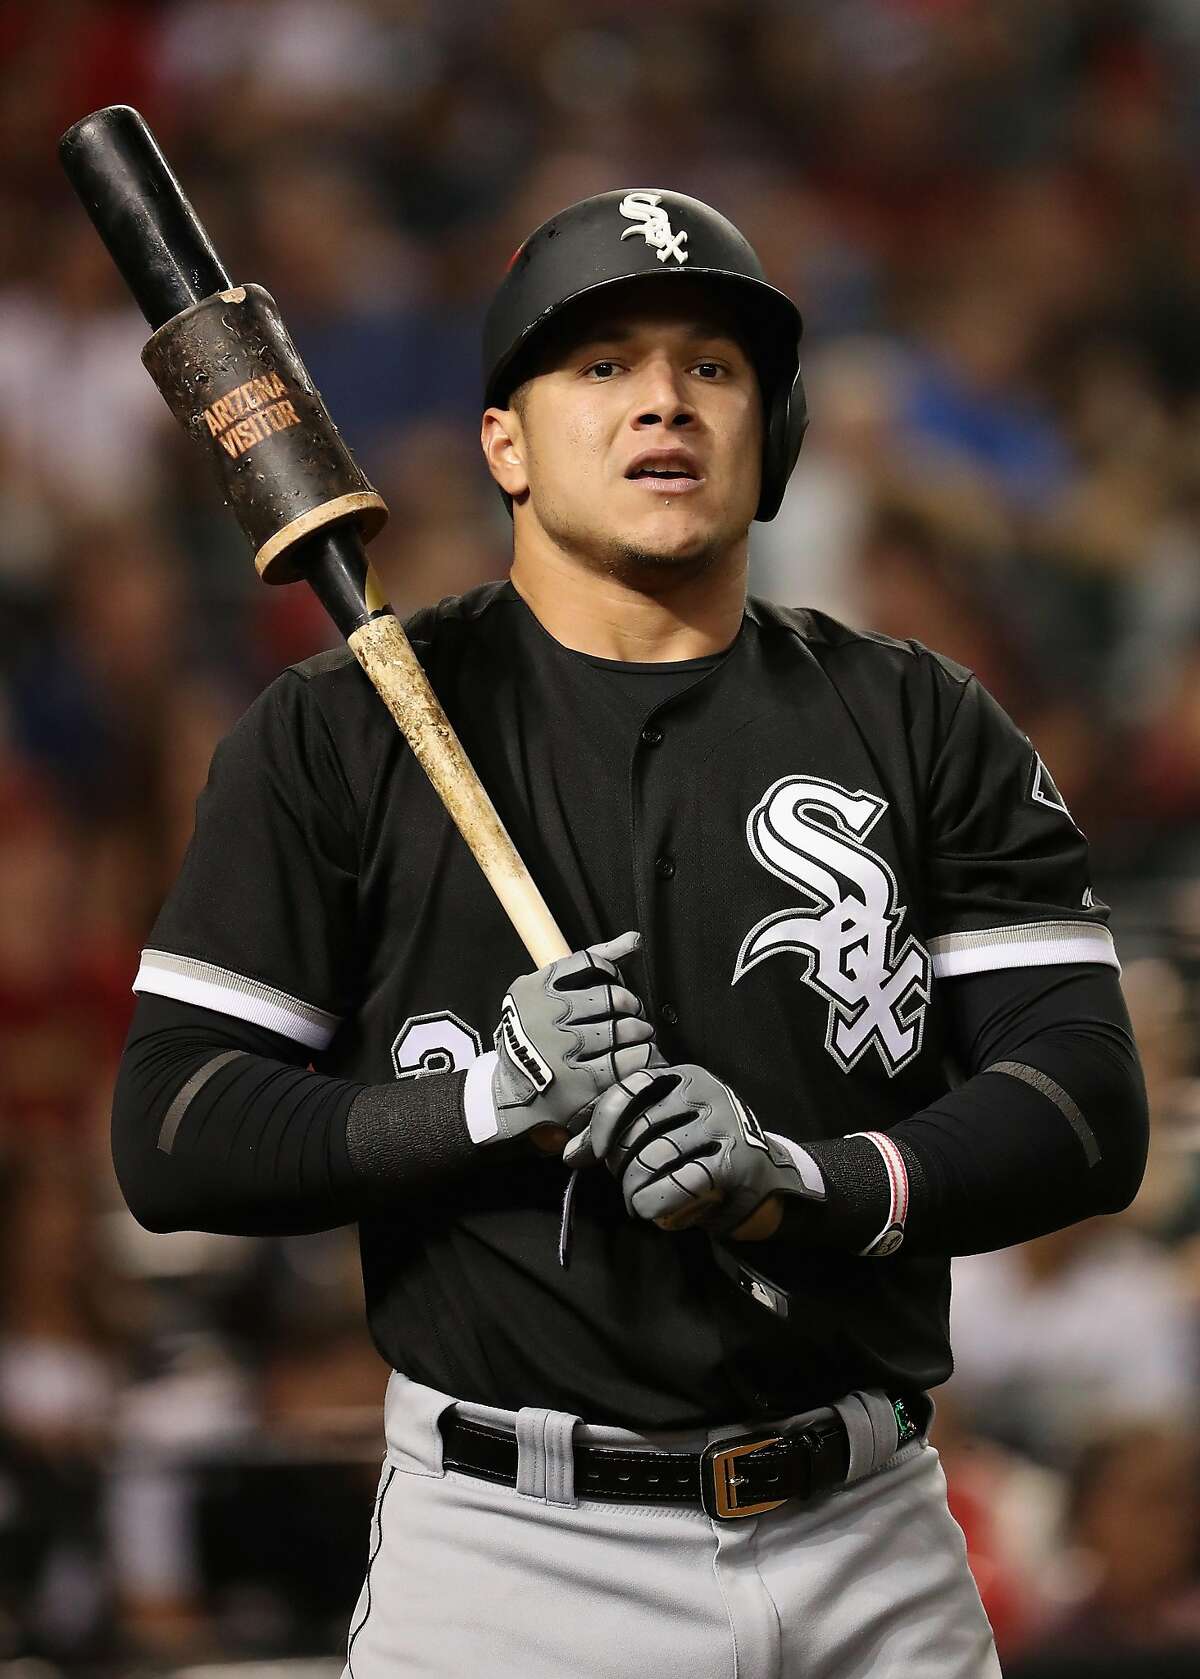 PHOENIX, AZ - MAY 23: Avisail Garcia #26 of the Chicago White Sox warms up on deck during the eighth inning of the MLB game against the Arizona Diamondbacks at Chase Field on May 23, 2017 in Phoenix, Arizona (Photo by Christian Petersen/Getty Images)